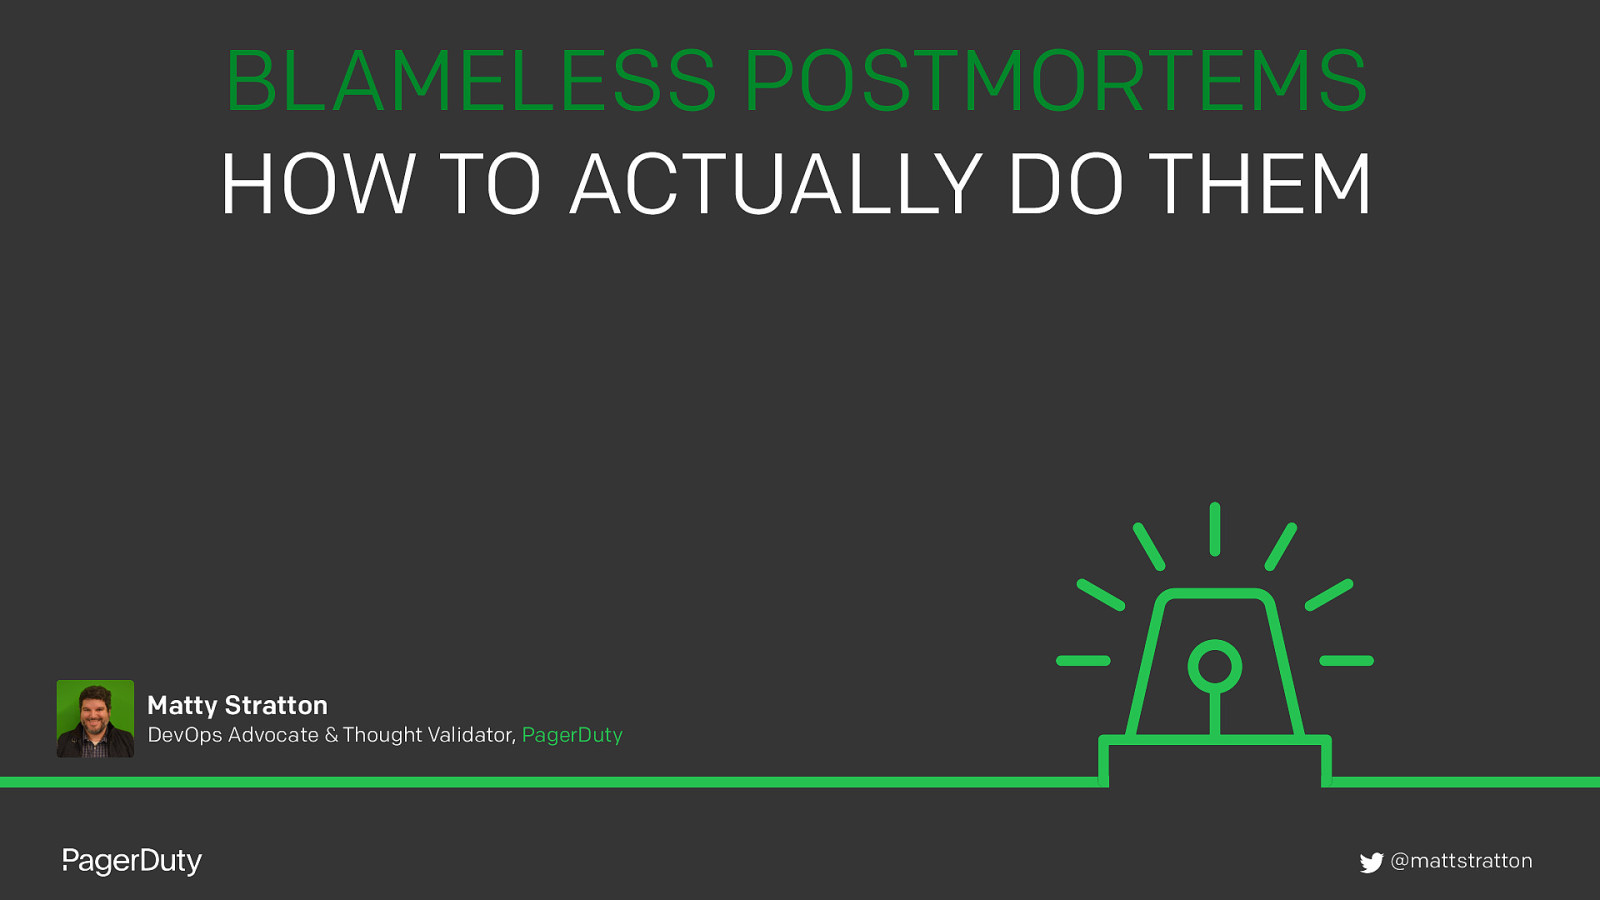 Blameless Postmortems: How to Actually Do Them